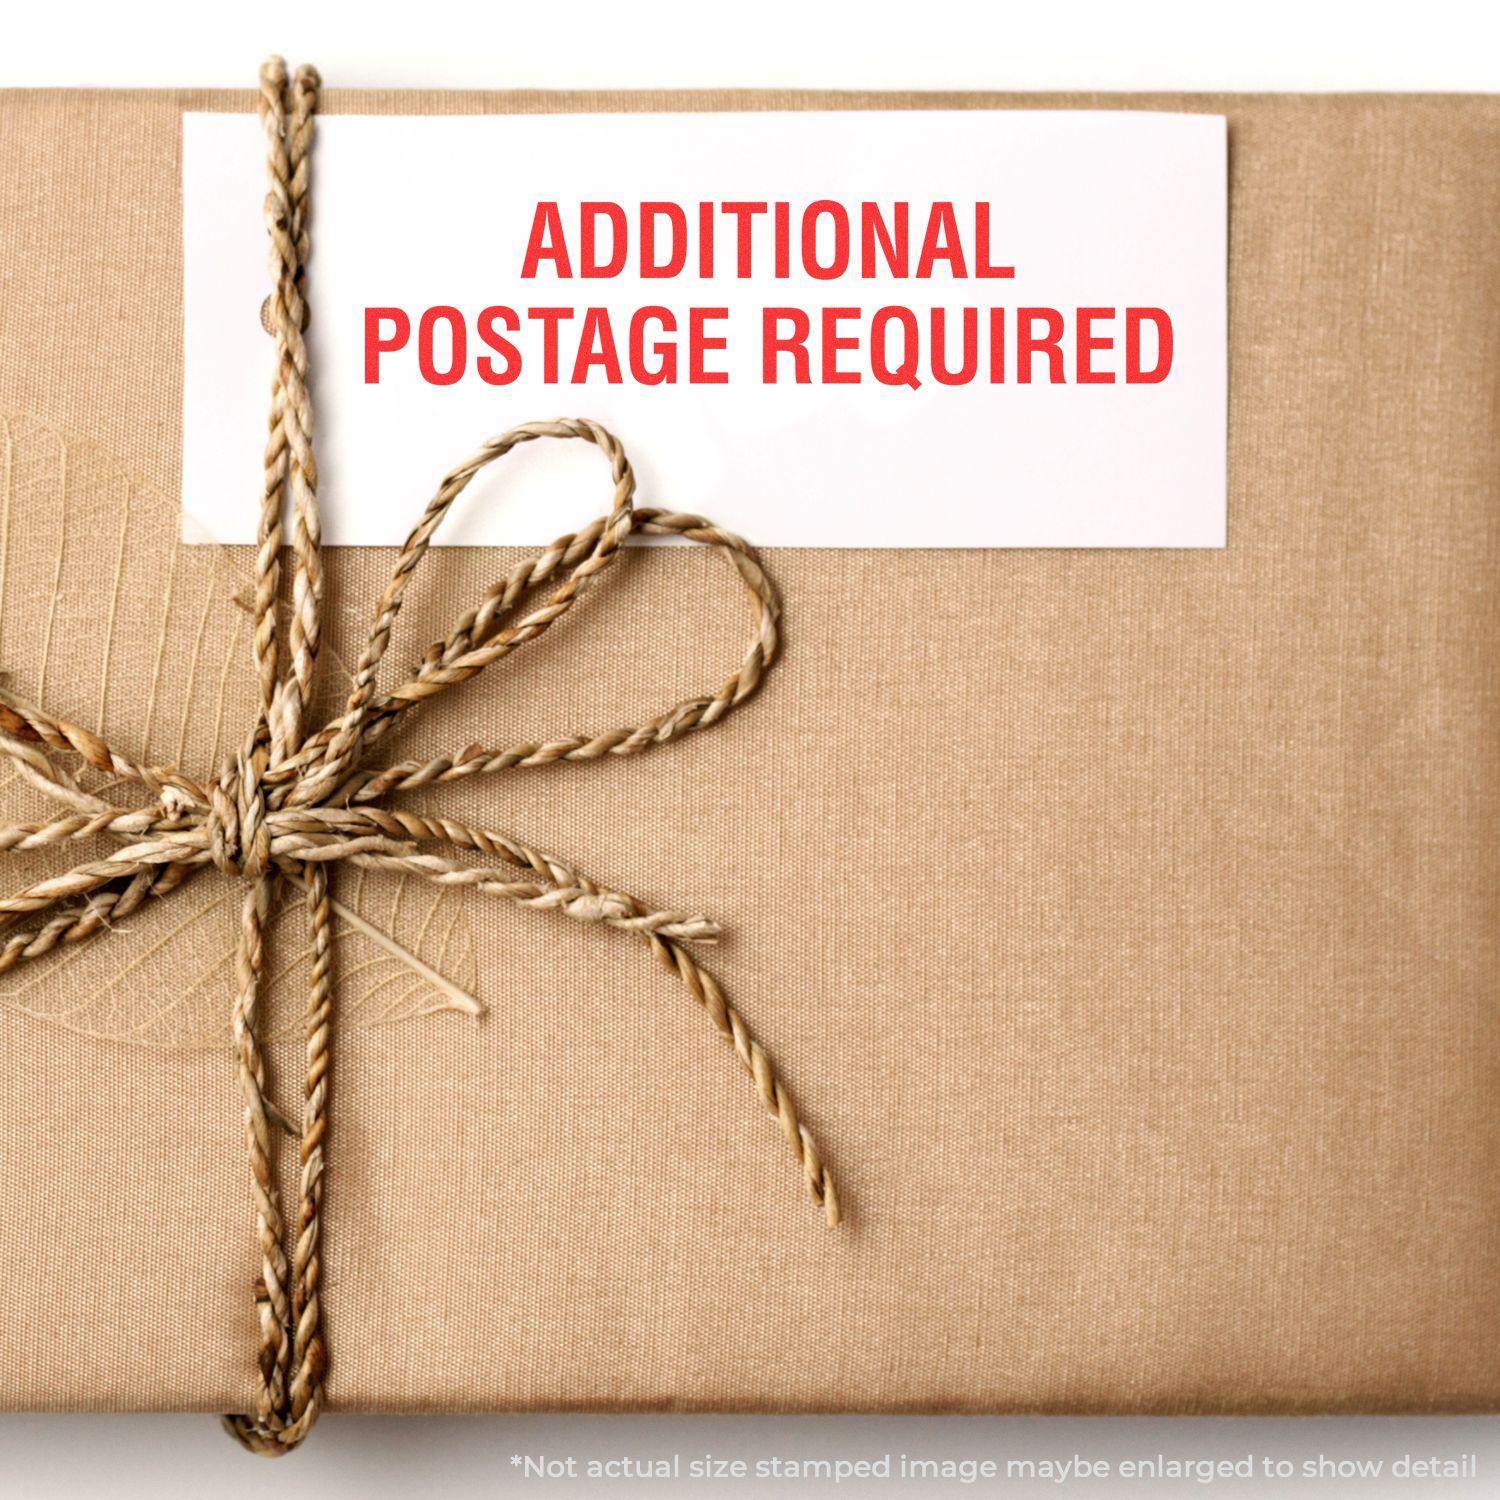 A stock office rubber stamp with a stamped image showing how the text "ADDITIONAL POSTAGE REQUIRED" is displayed after stamping.